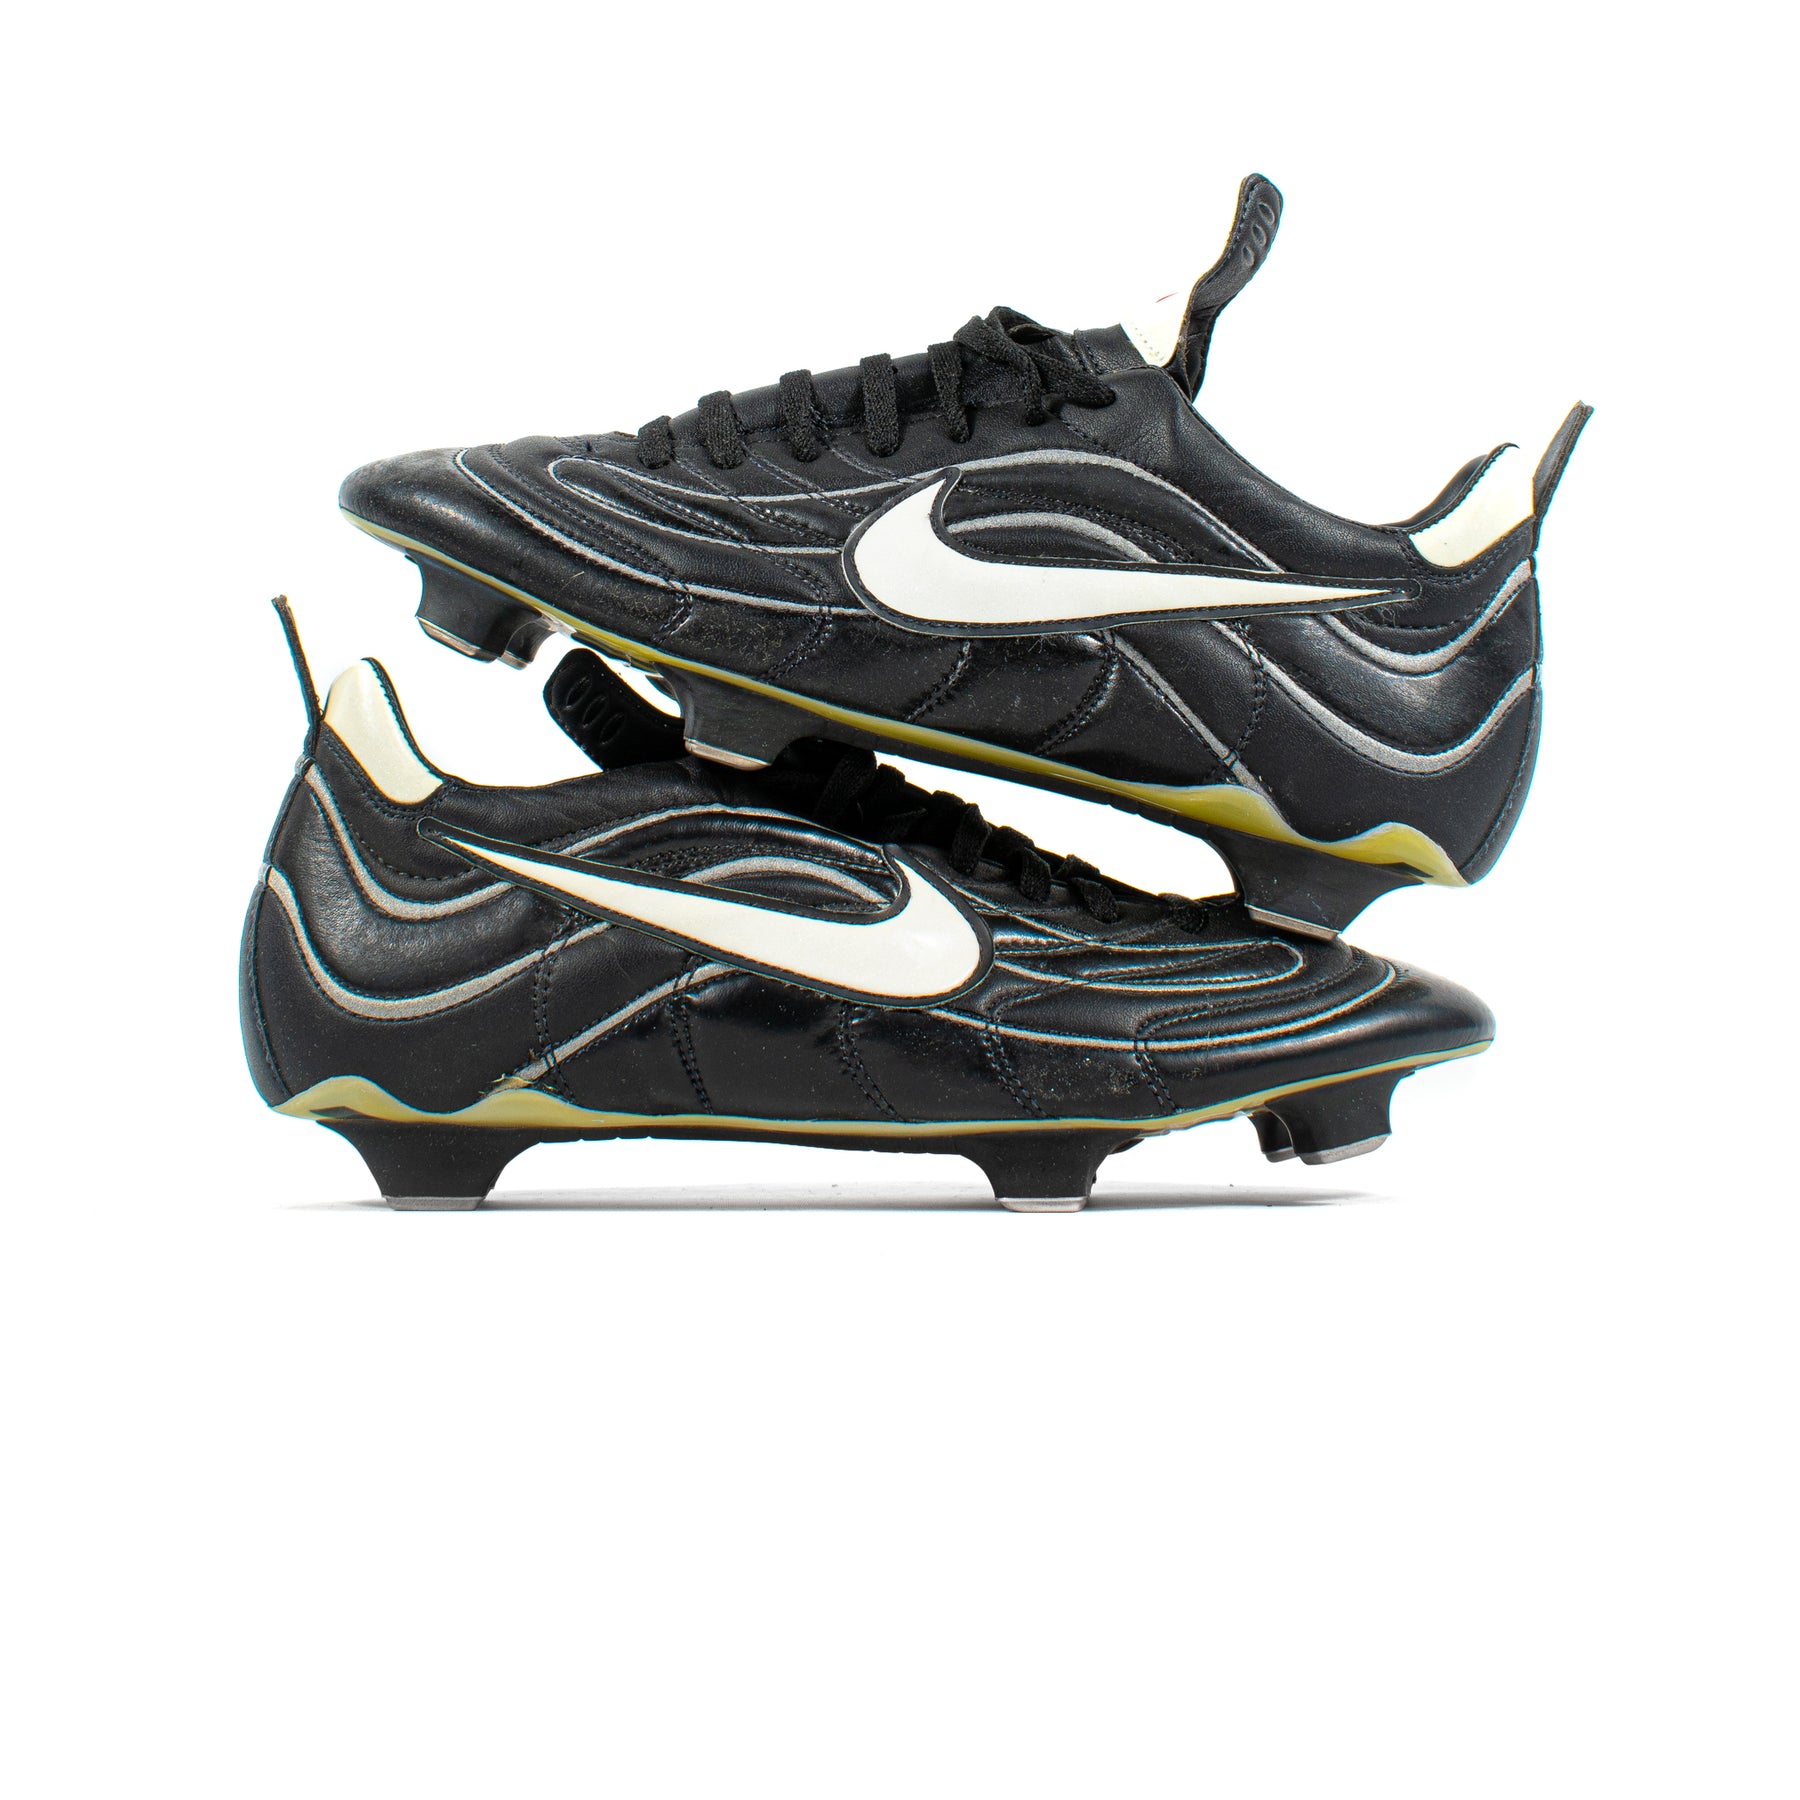 brindis Color rosa Concentración Nike Mercurial R9 1998 Black White SG – Classic Soccer Cleats